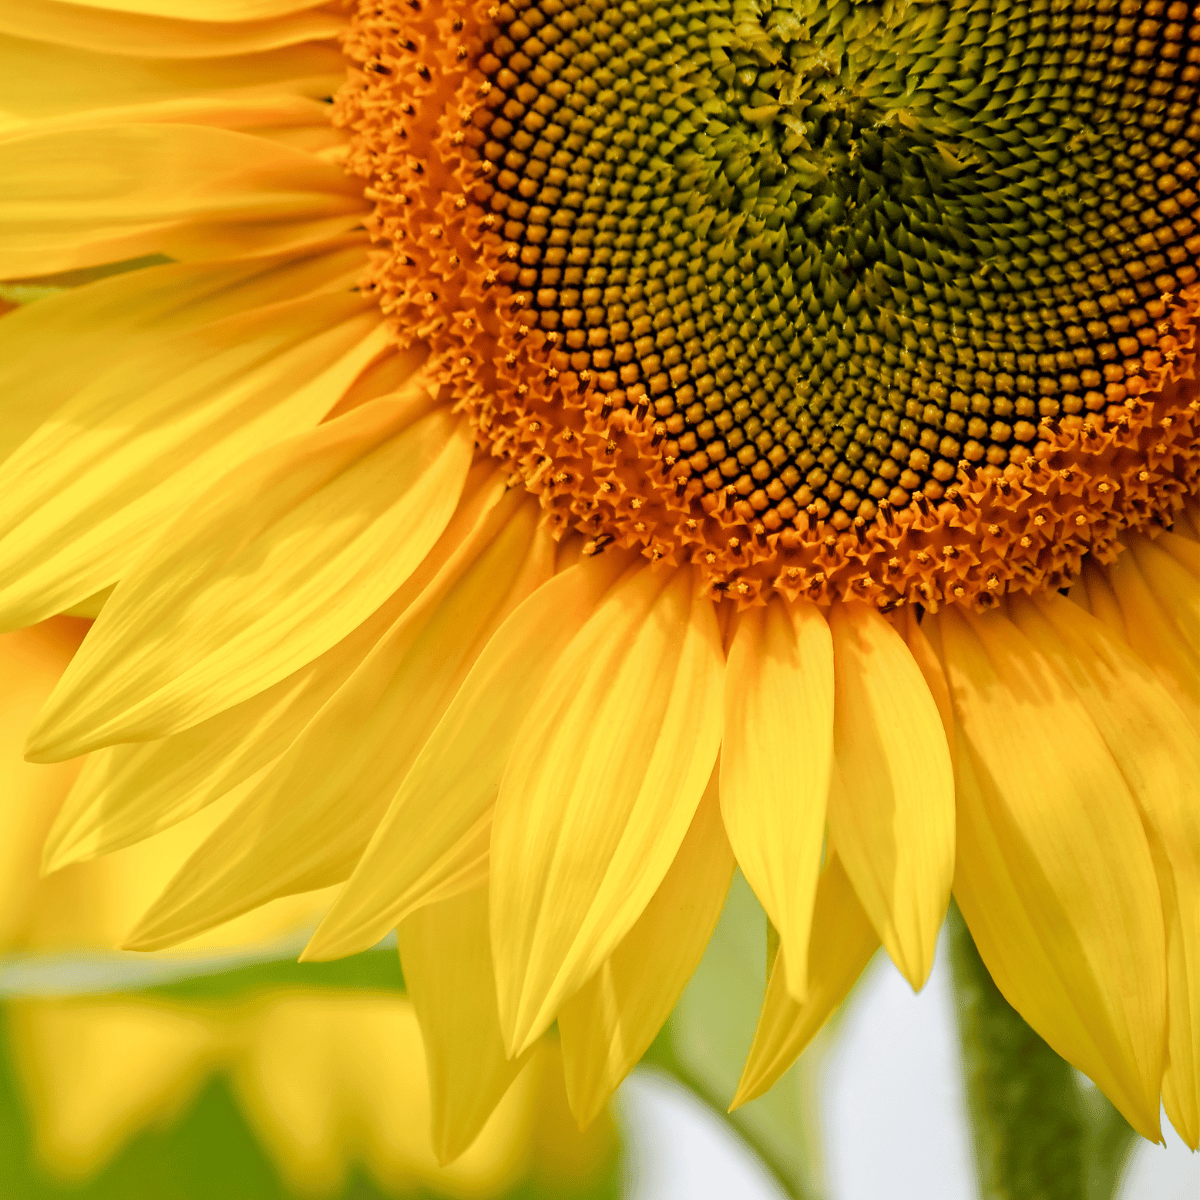 Planting Sunflower Seeds Indoors: How to Grow Sunflowers